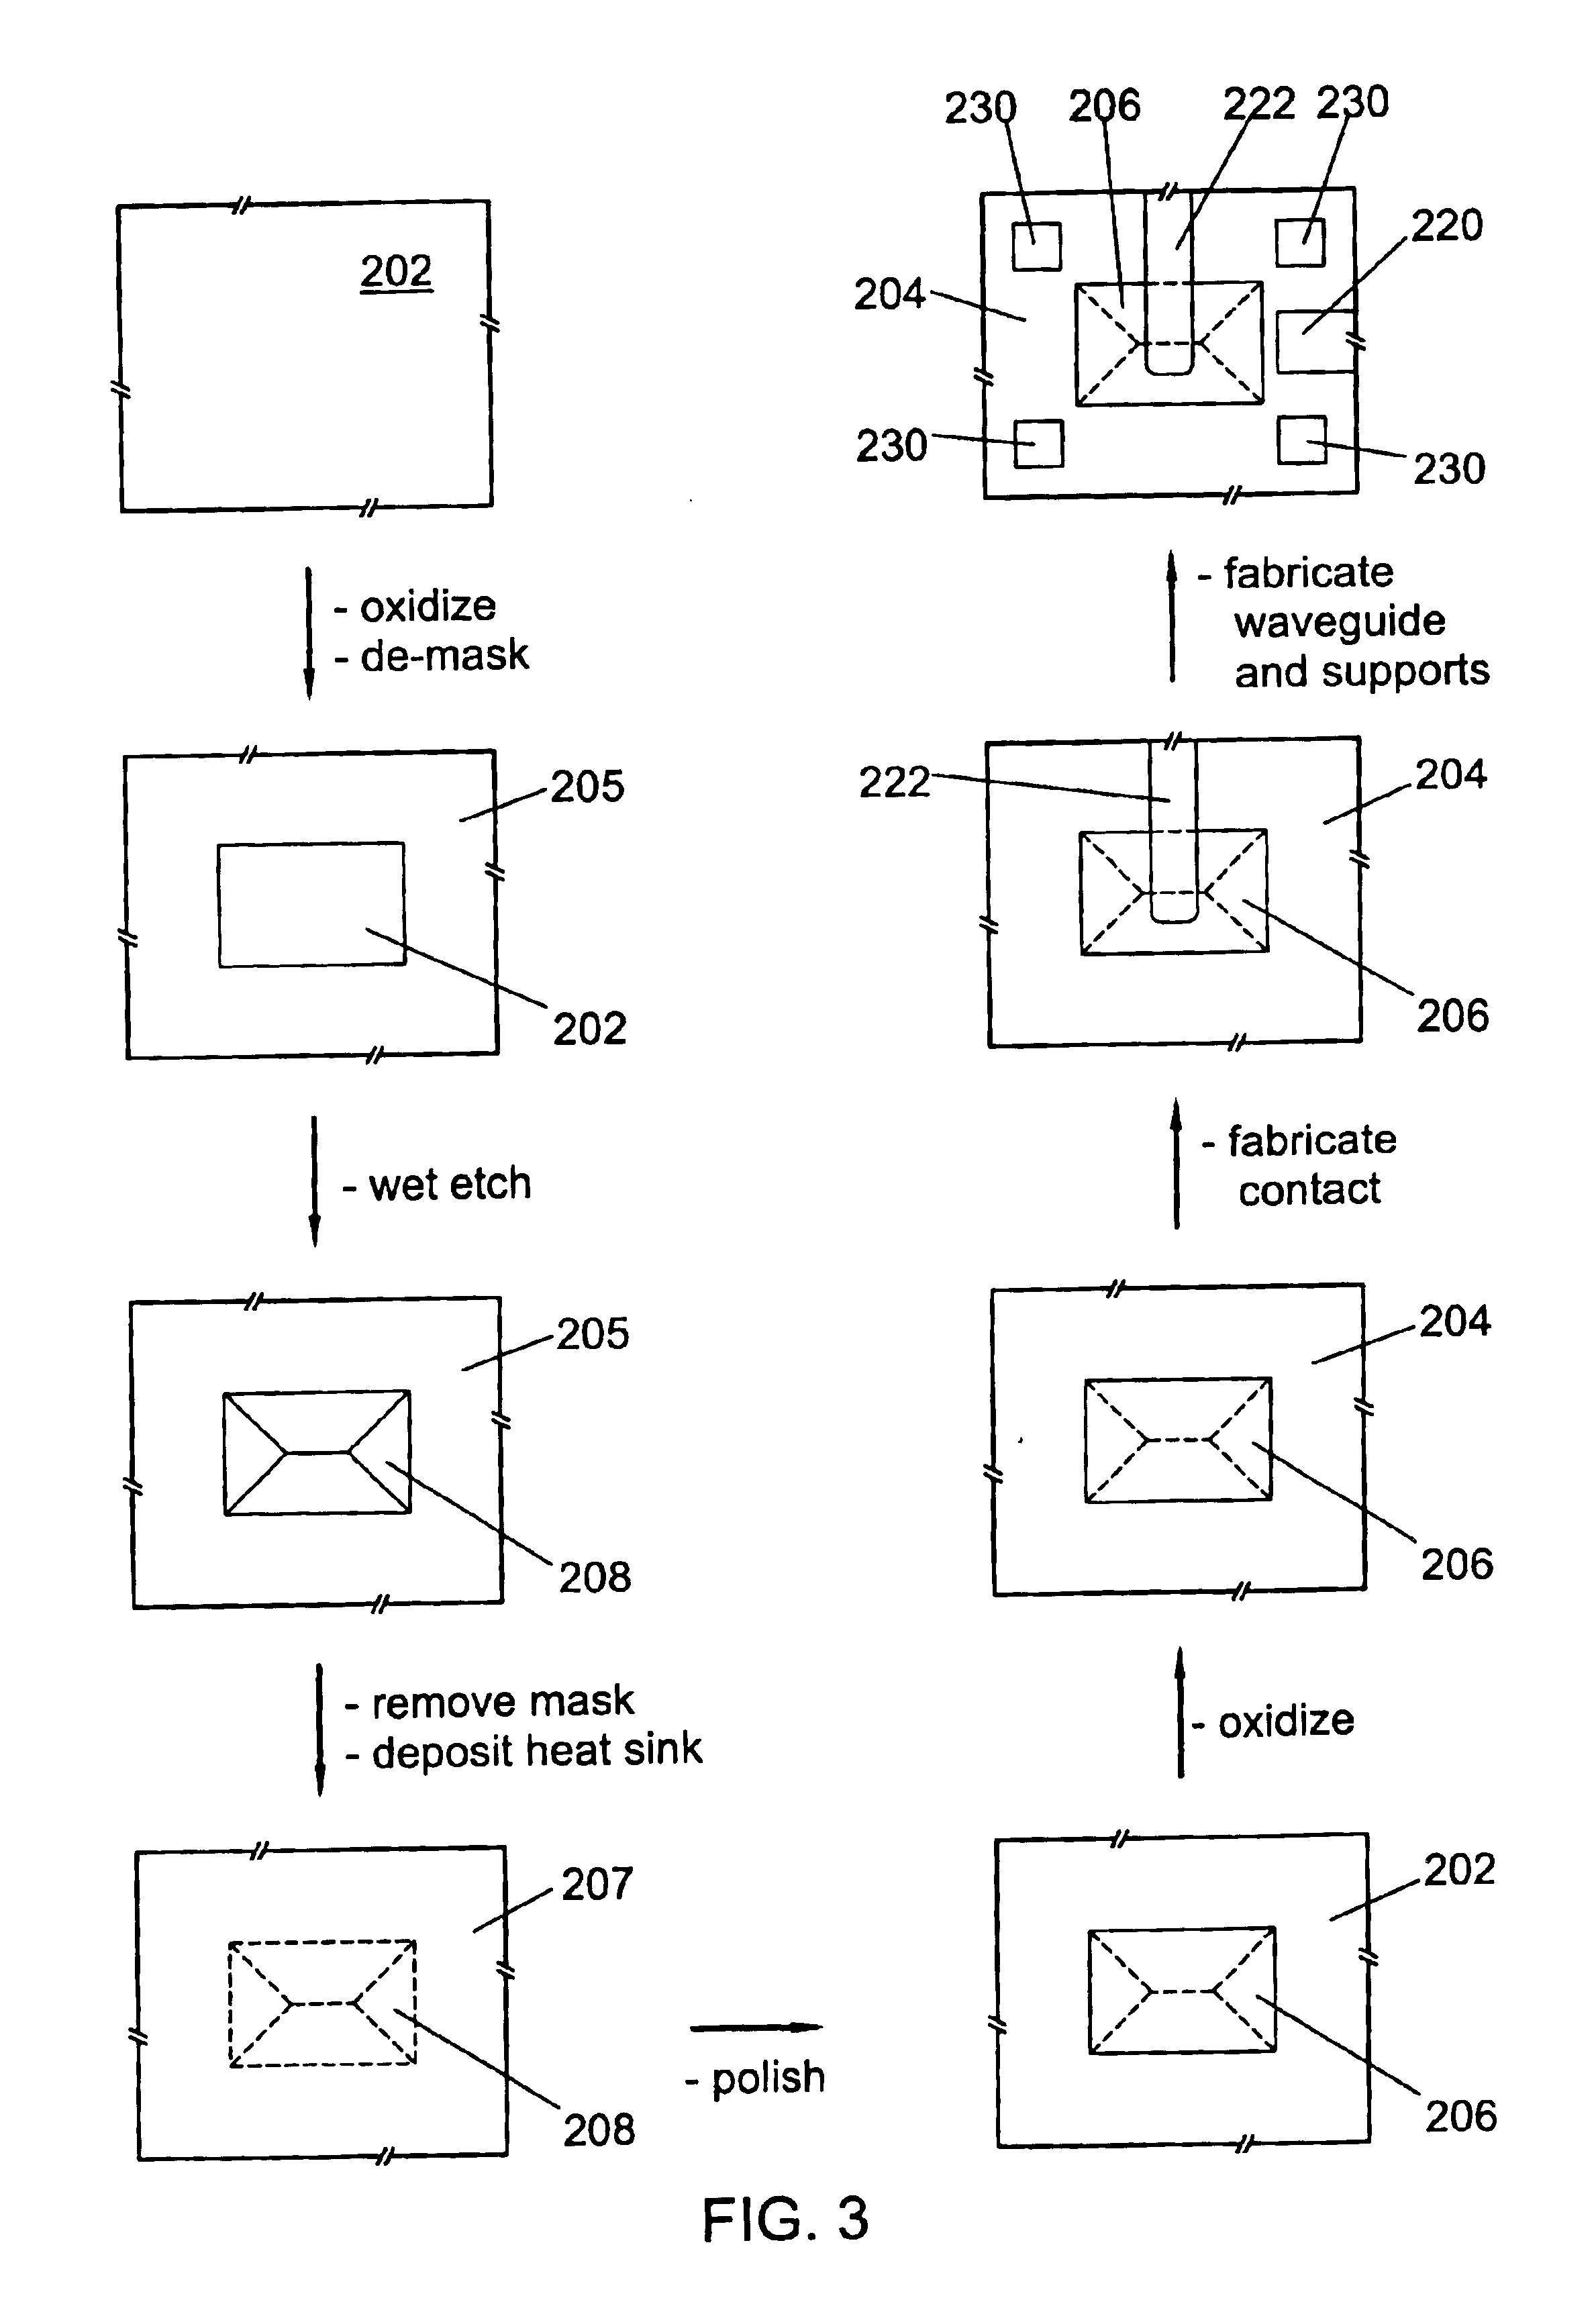 Heat sink for a planar waveguide substrate